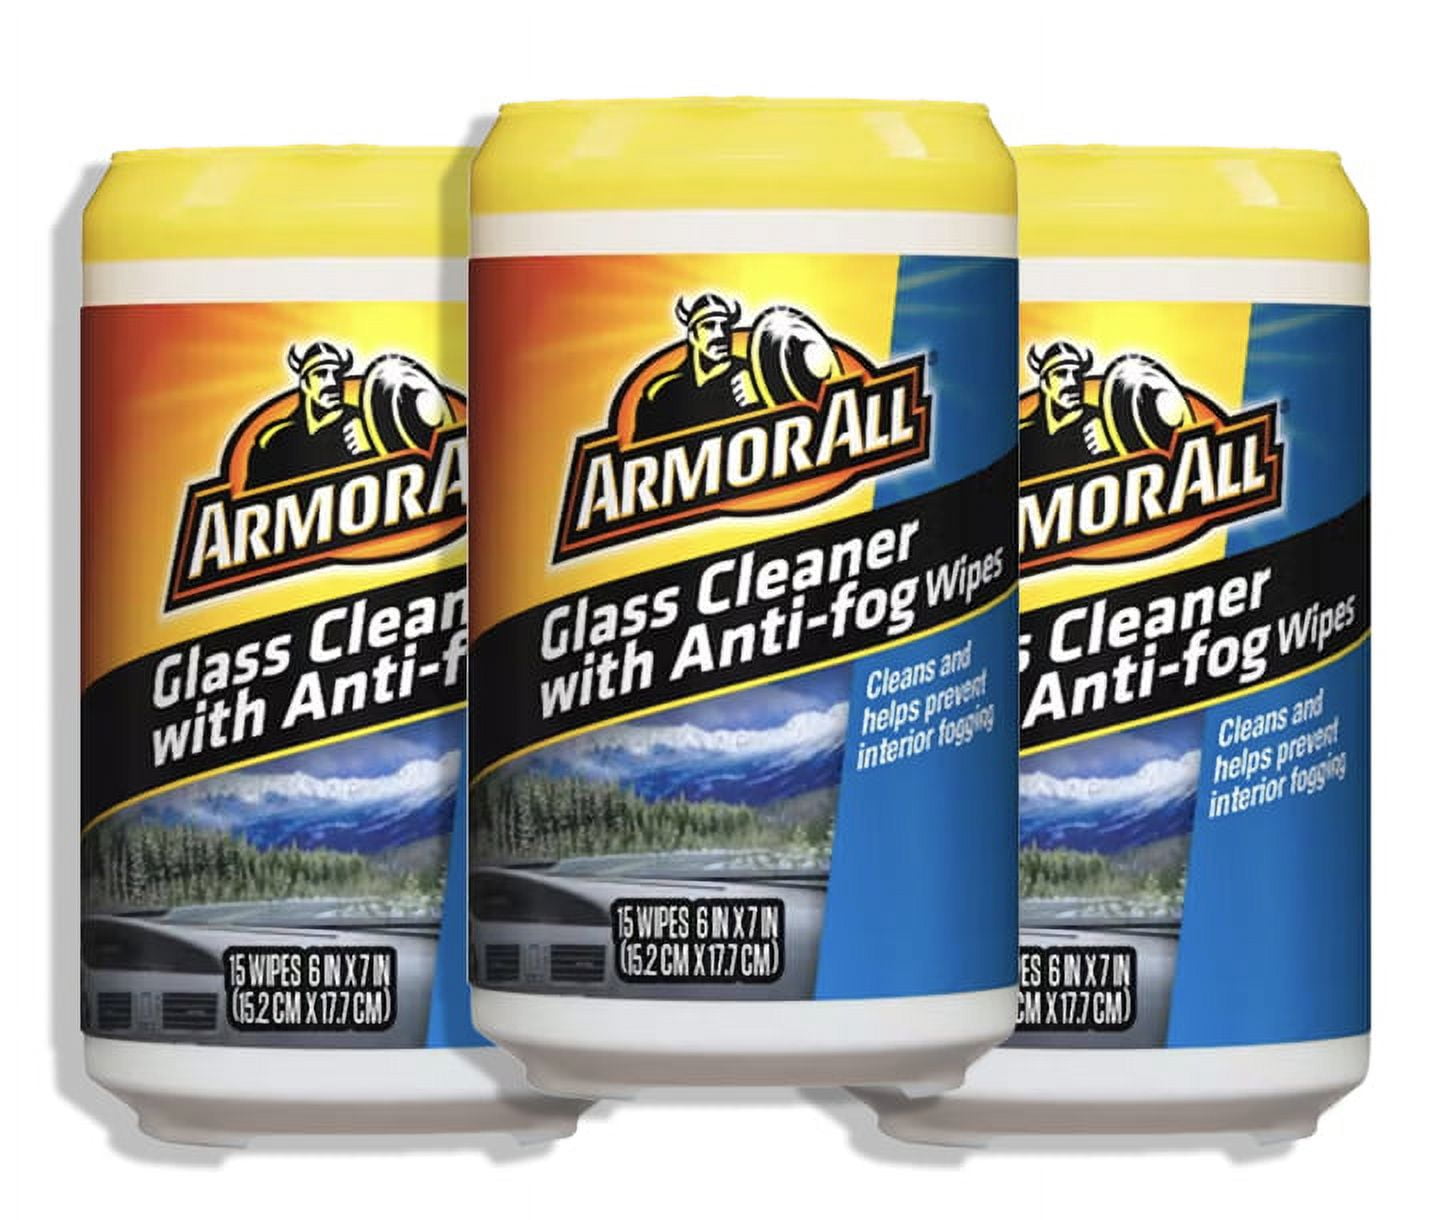 Armor All Clean-Up Wipes - Car Interior Cleaning Wipes, Convenient and  Effective Car Cleaning Wipes, 15 Wipes, 6 Pack